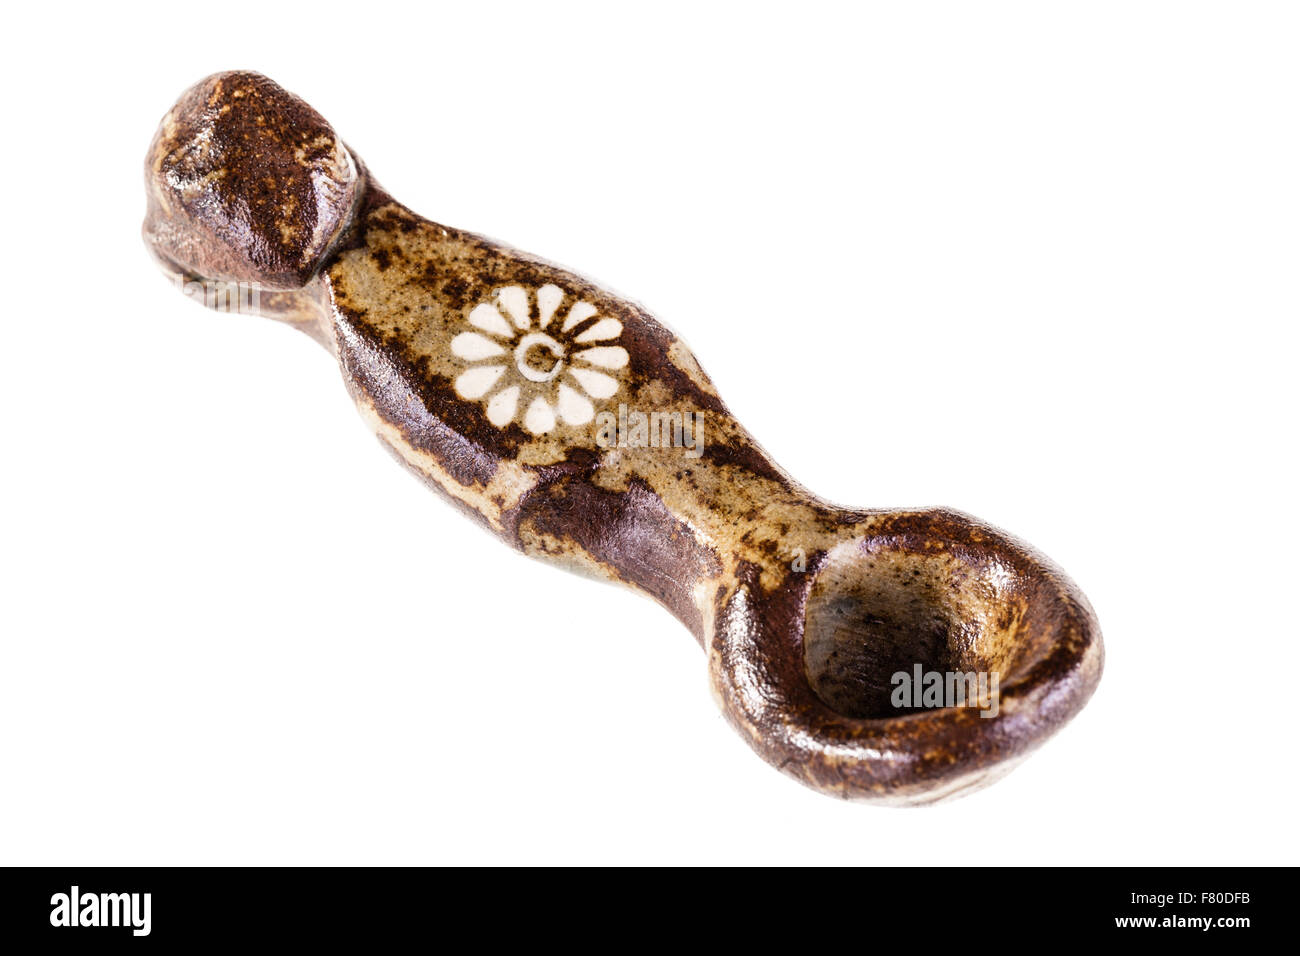 an ancient peruvian stone spoon archaeological find isolated over a white background Stock Photo